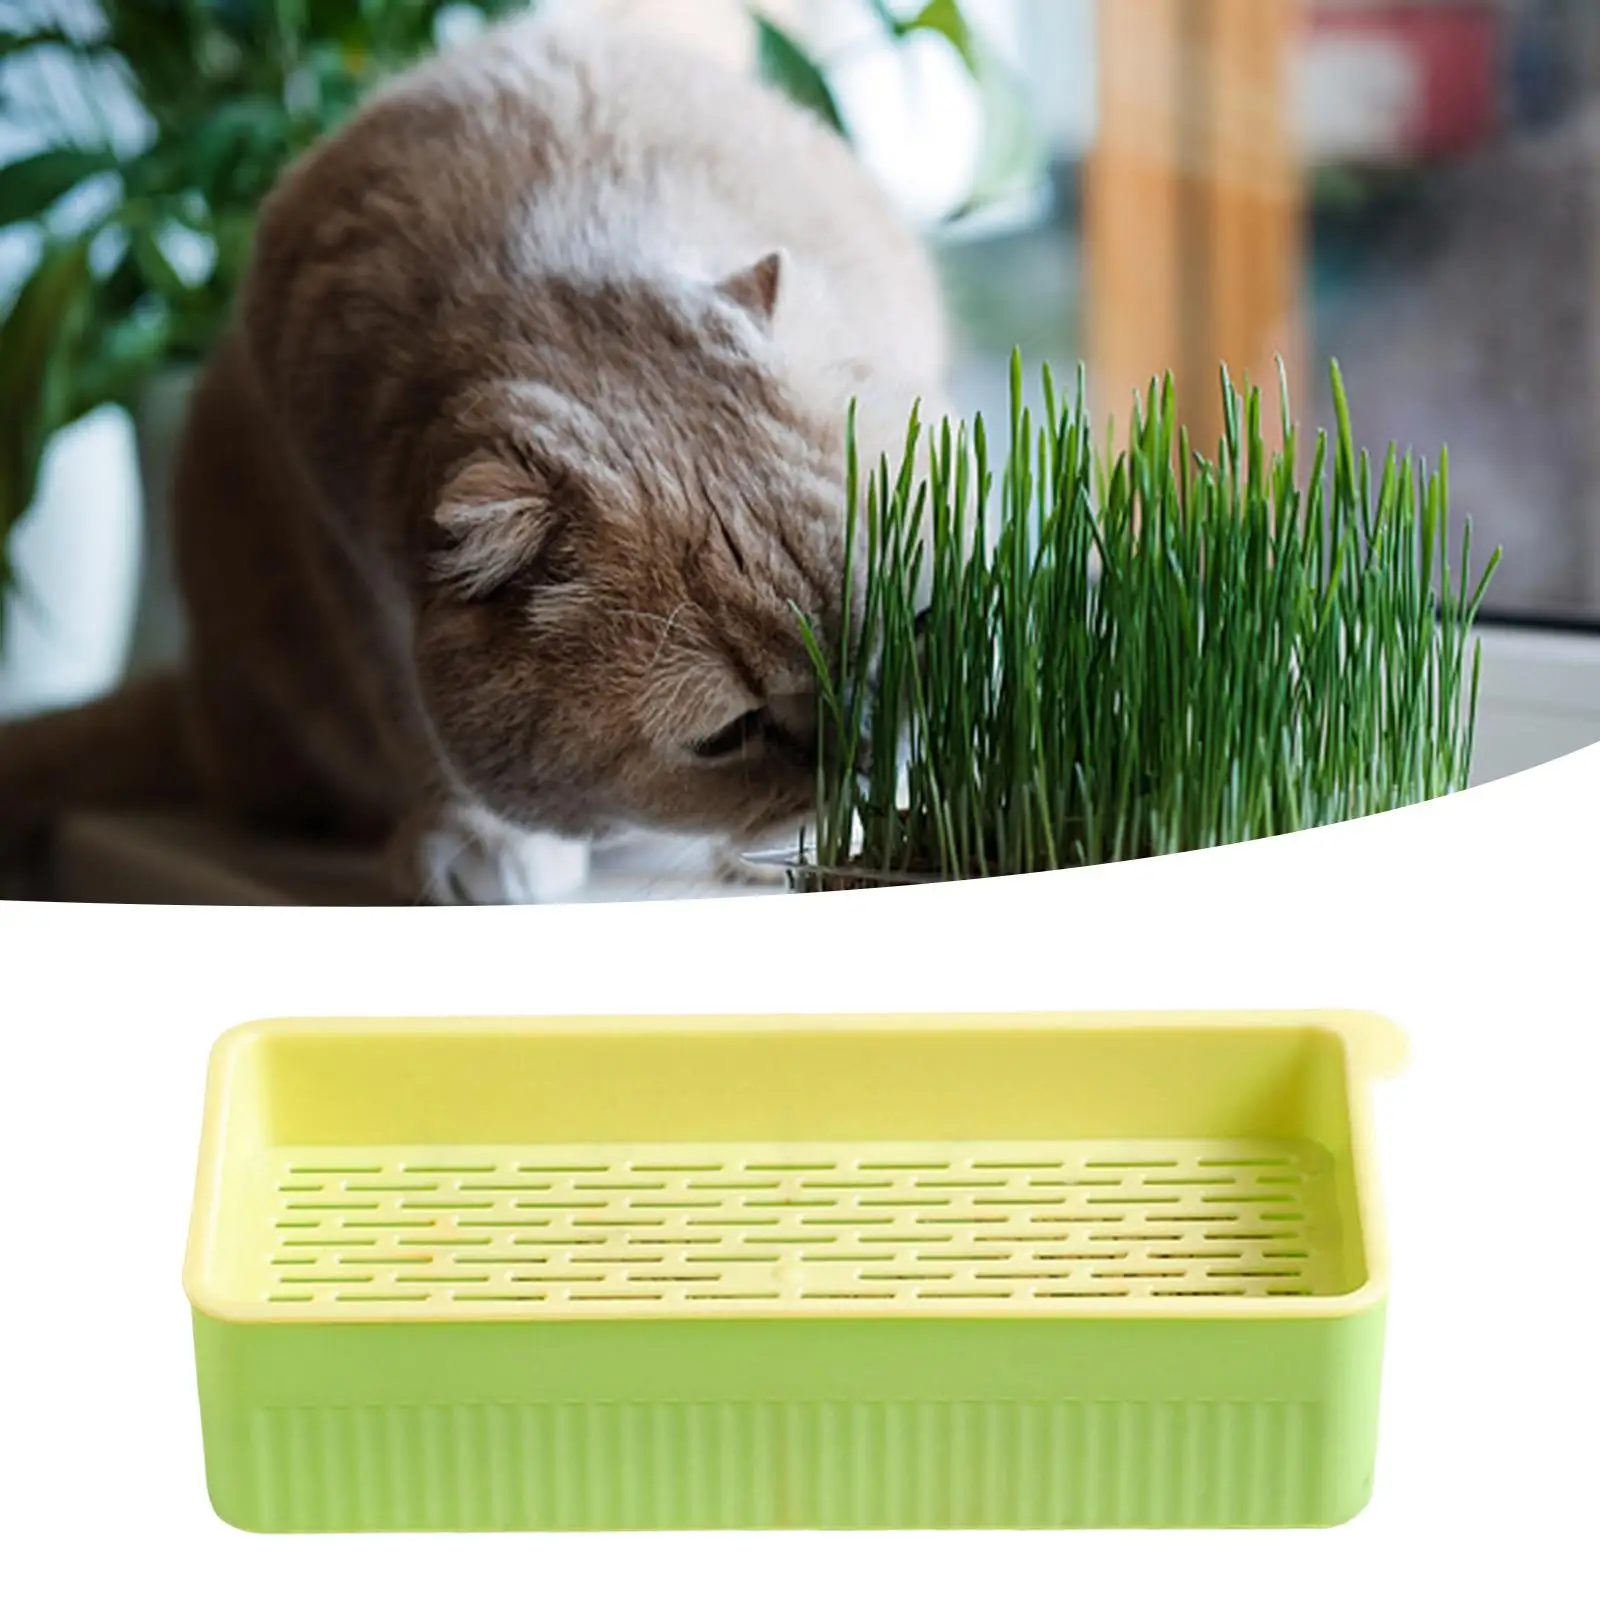 Seed Sprouter Tray Catnip Cultivation Box Sprouting Container with Drain Holes Cats Grass Hydroponic Box for Microgreens Garden